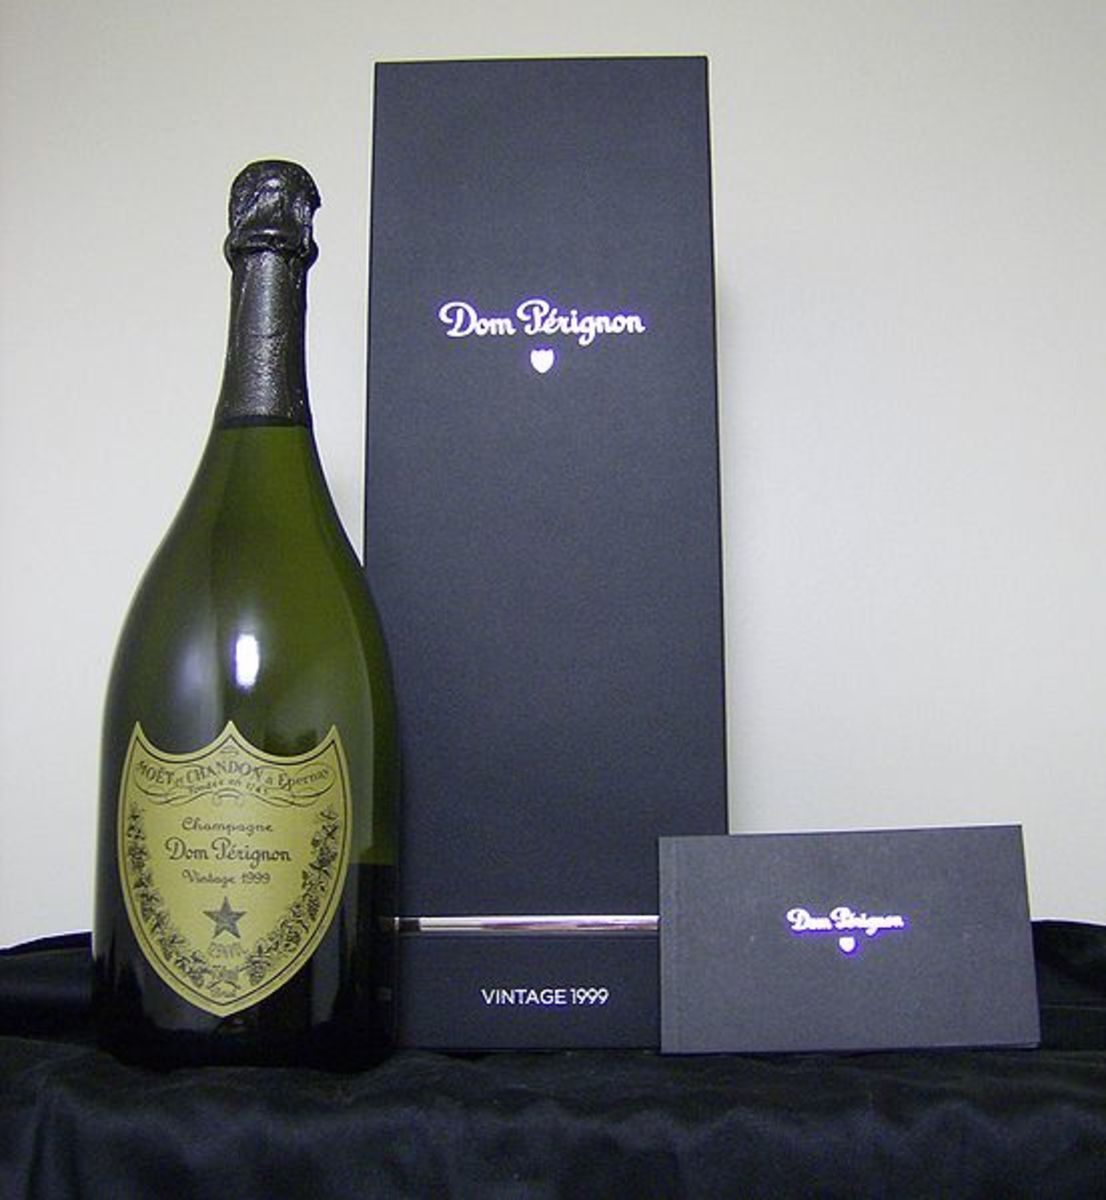 Most Expensive Vintage Champagne in the World?